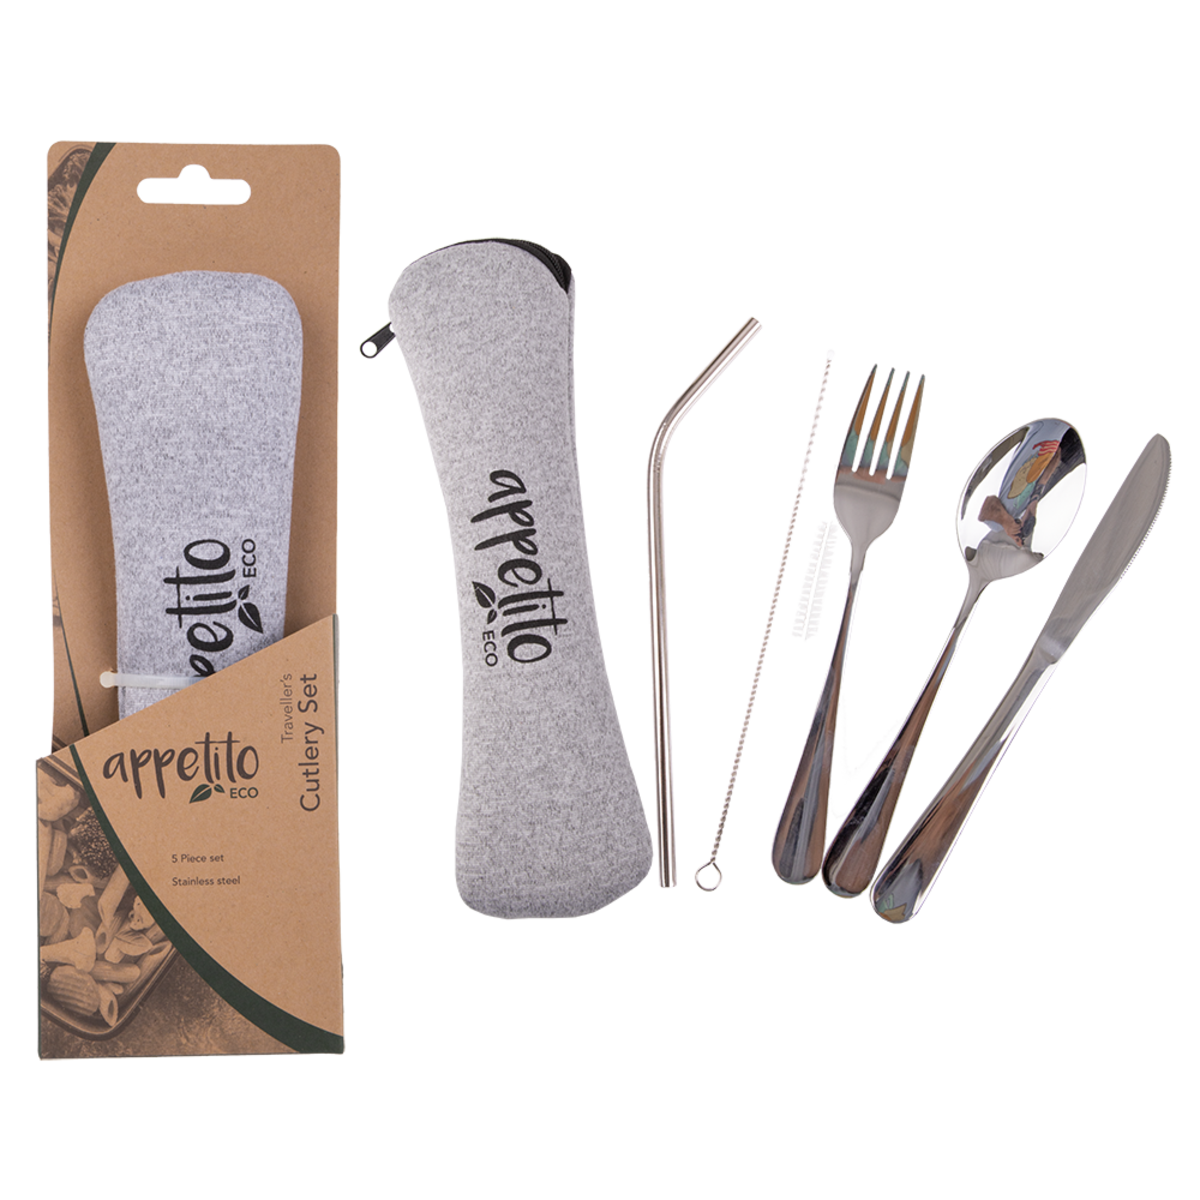 APPETITO 5 PIECE STAINLESS STEEL TRAVELLER'S CUTLERY SET